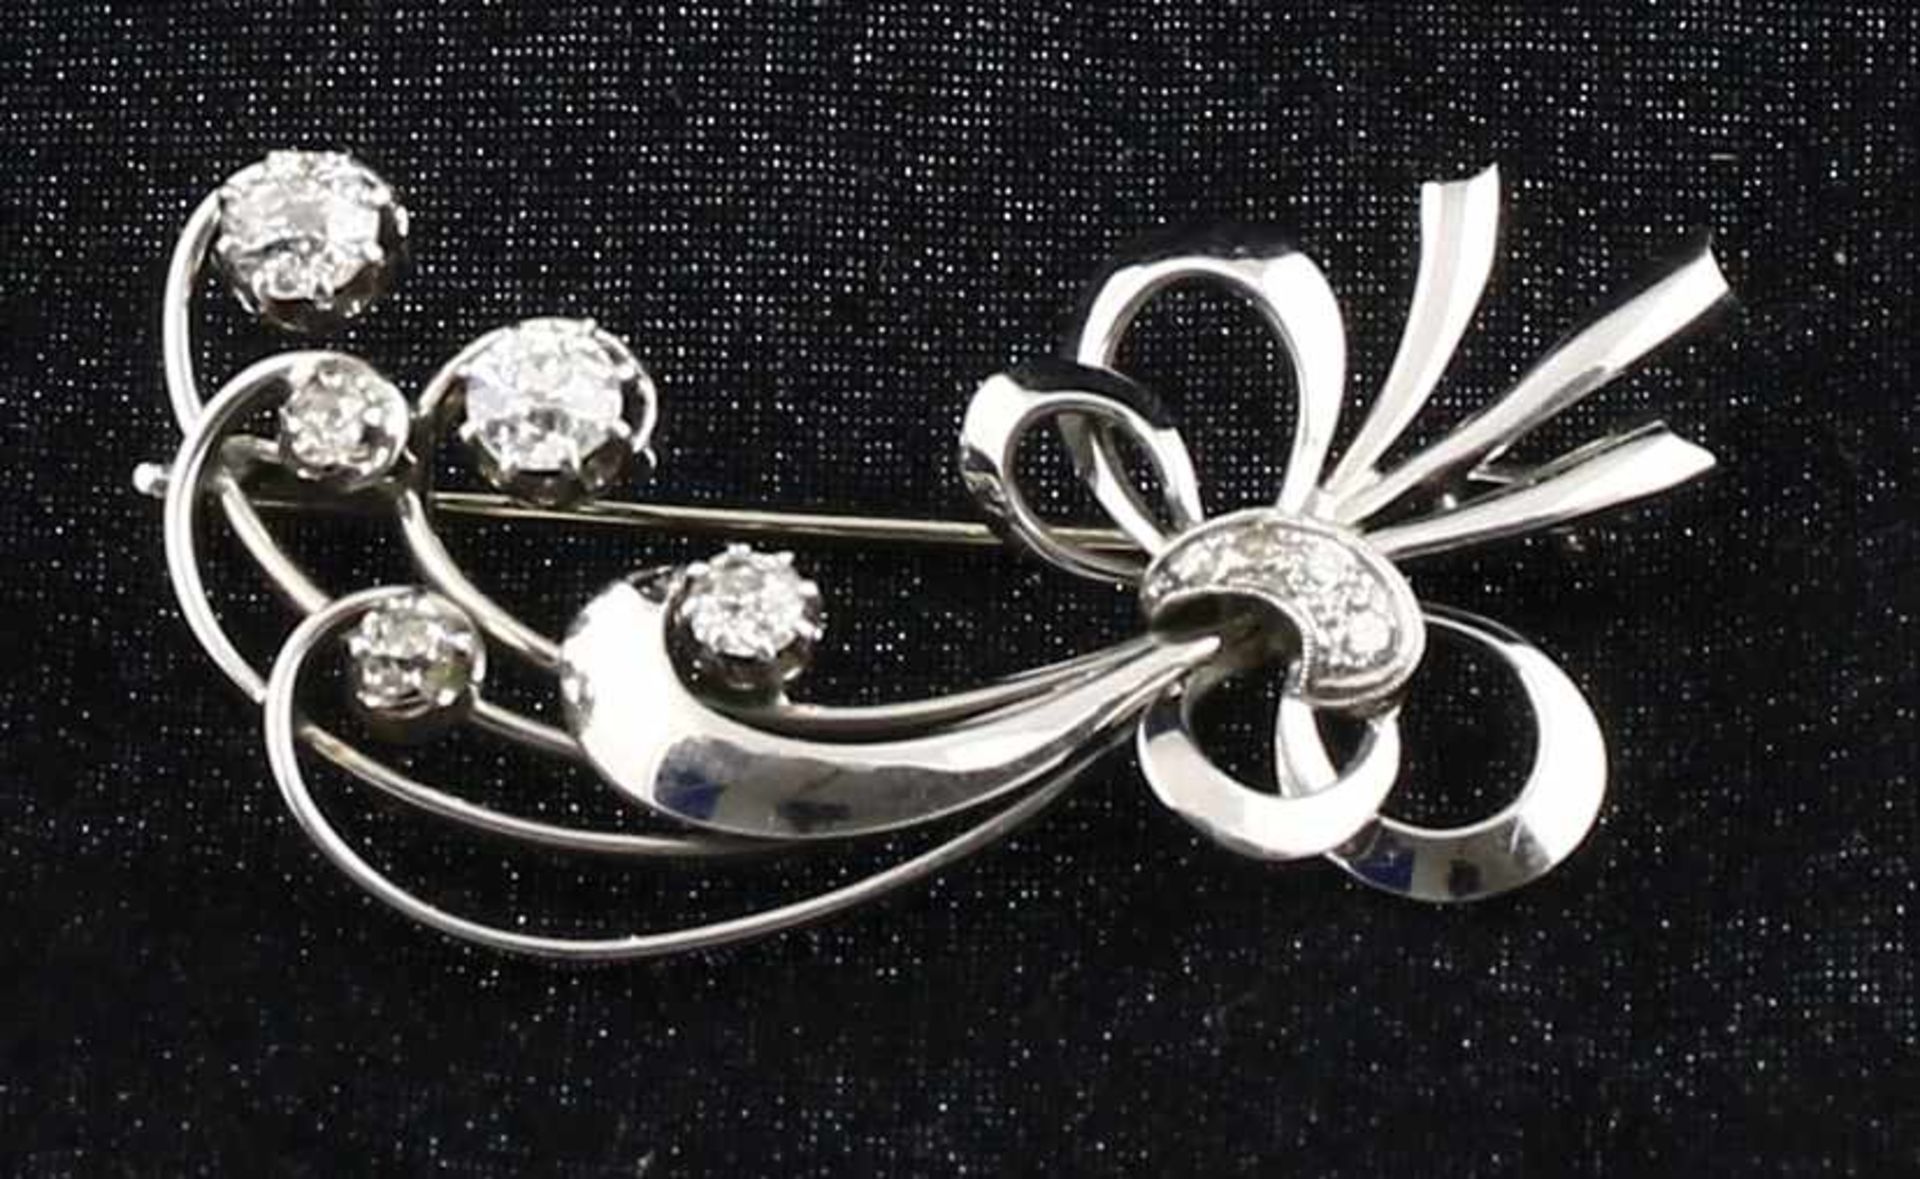 14k white gold brooch set with nine old-brilliant-cut diamonds, combined circa 0.60 ct. - 40 x 20 mm